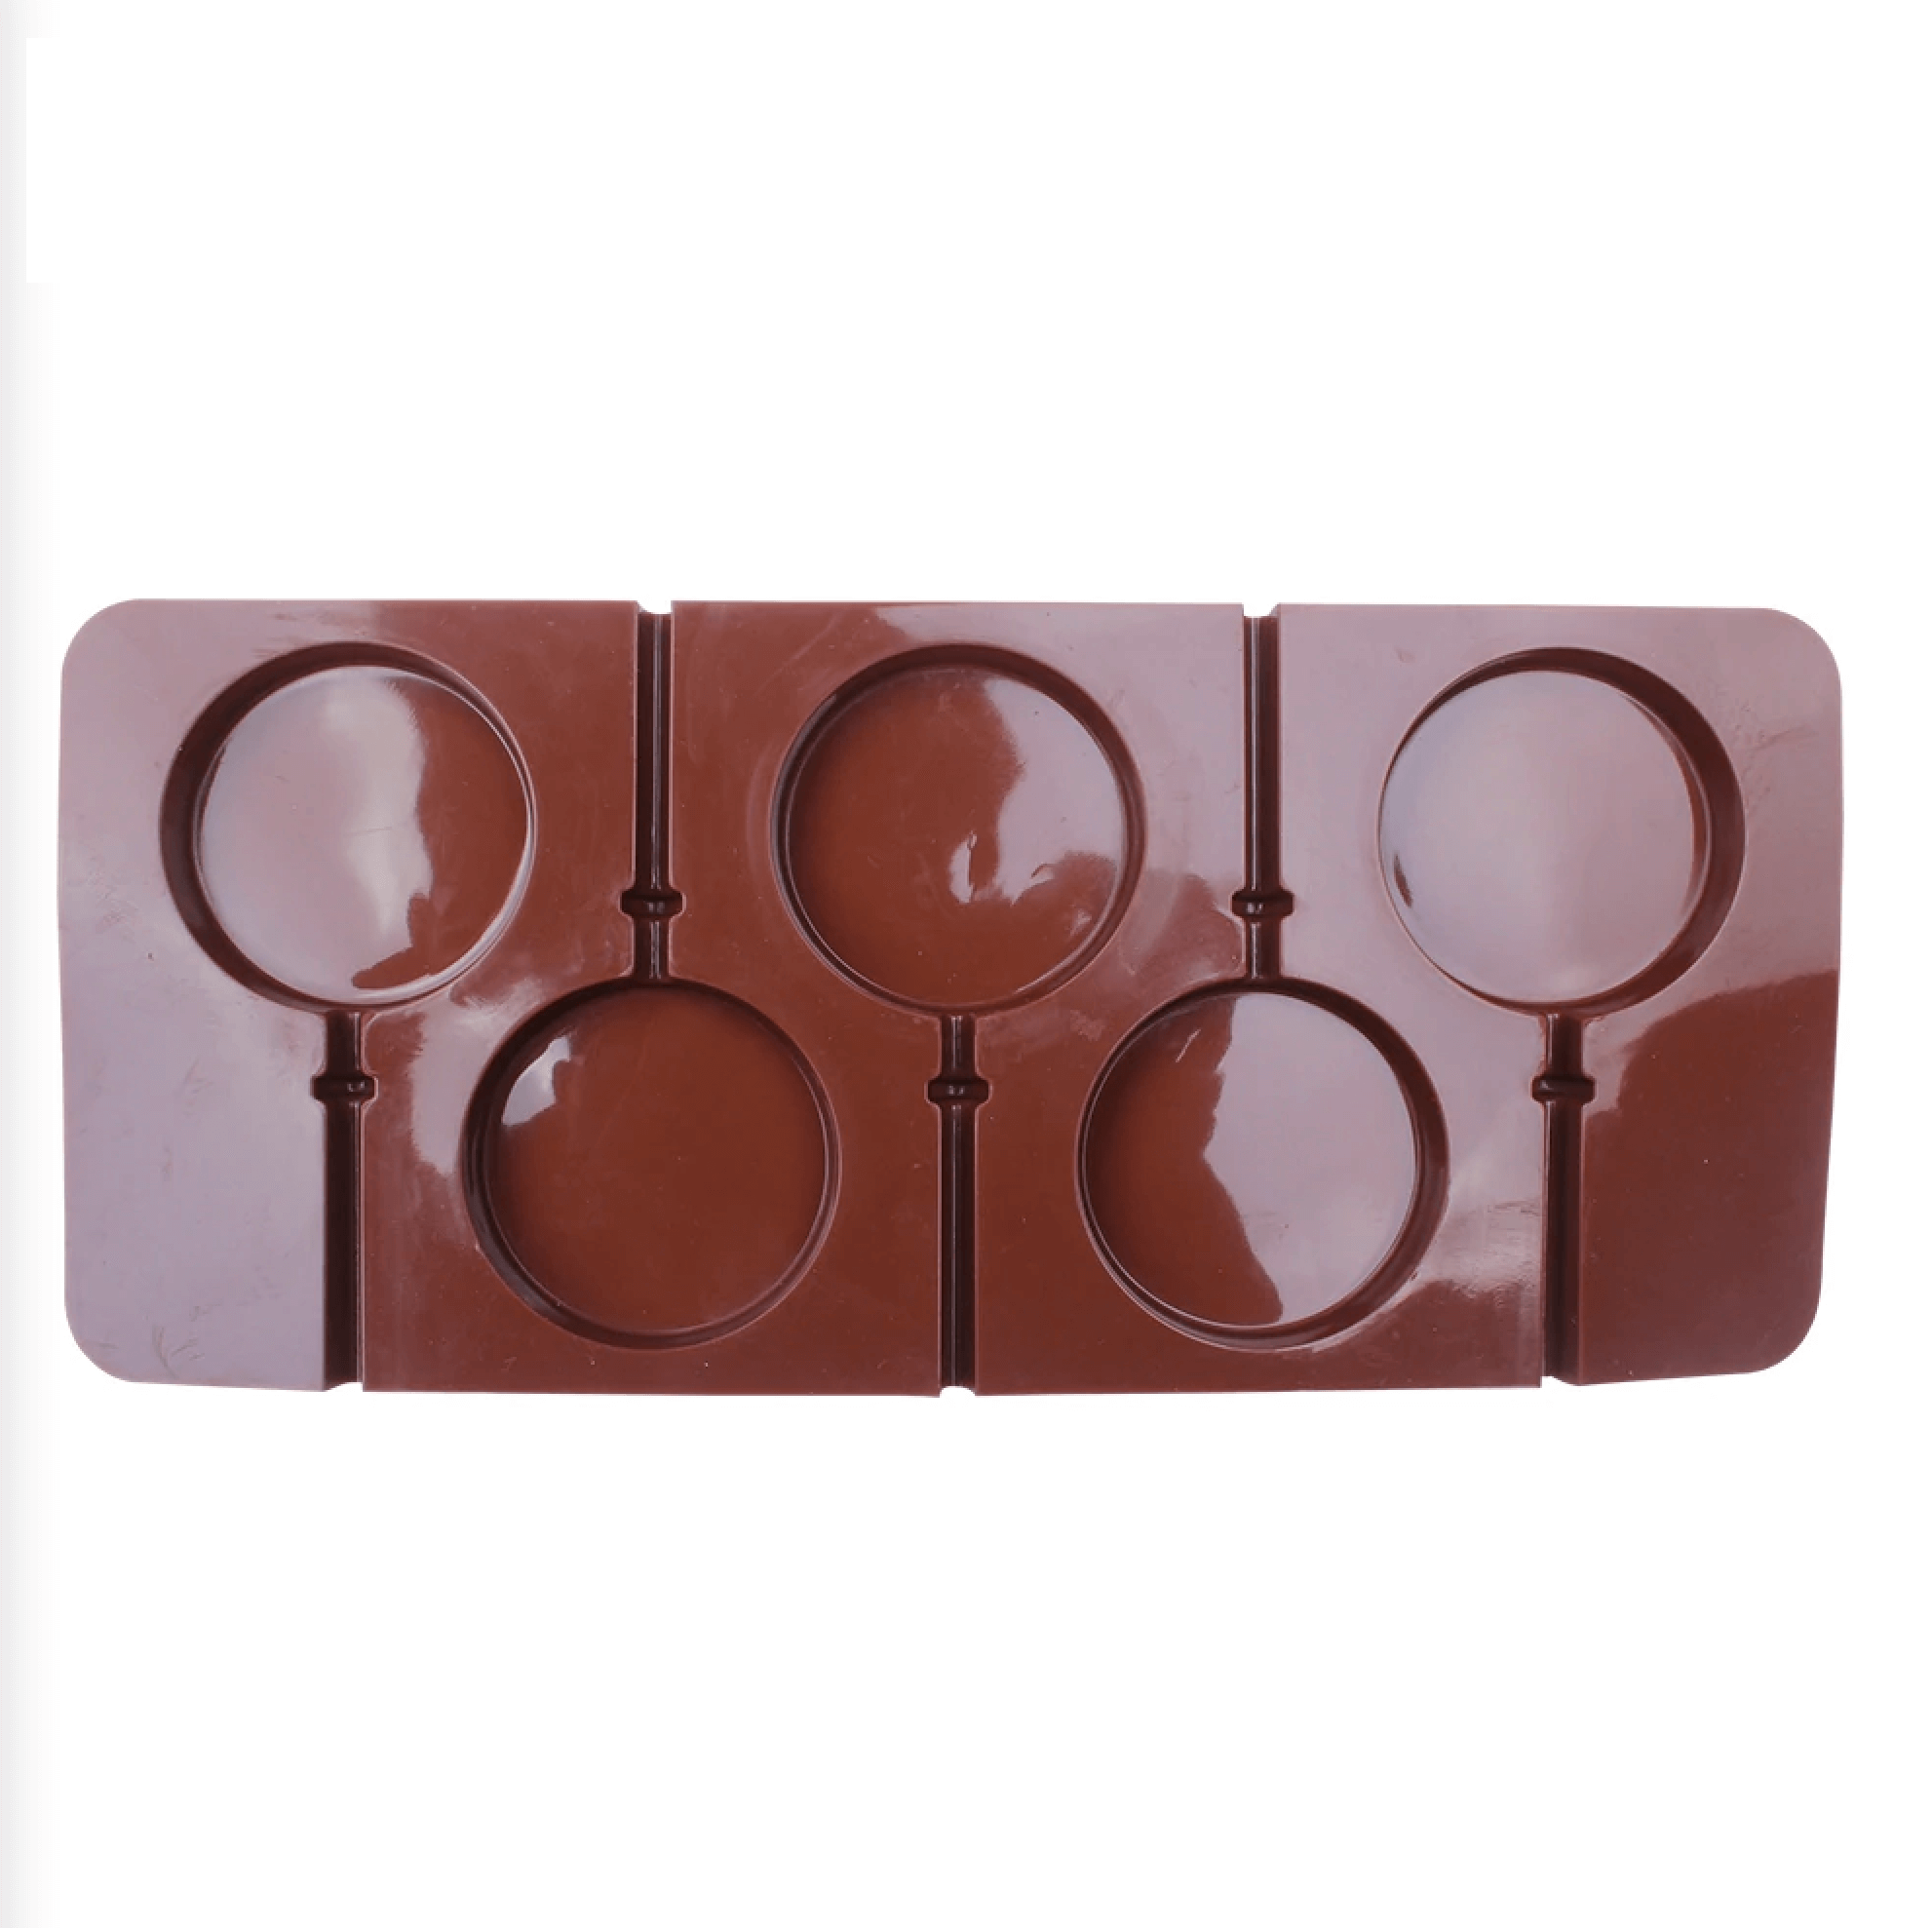 Brown Silicone Mold for Lollipops - 5 Cavity 2" (5cm) each - BSUPP026.